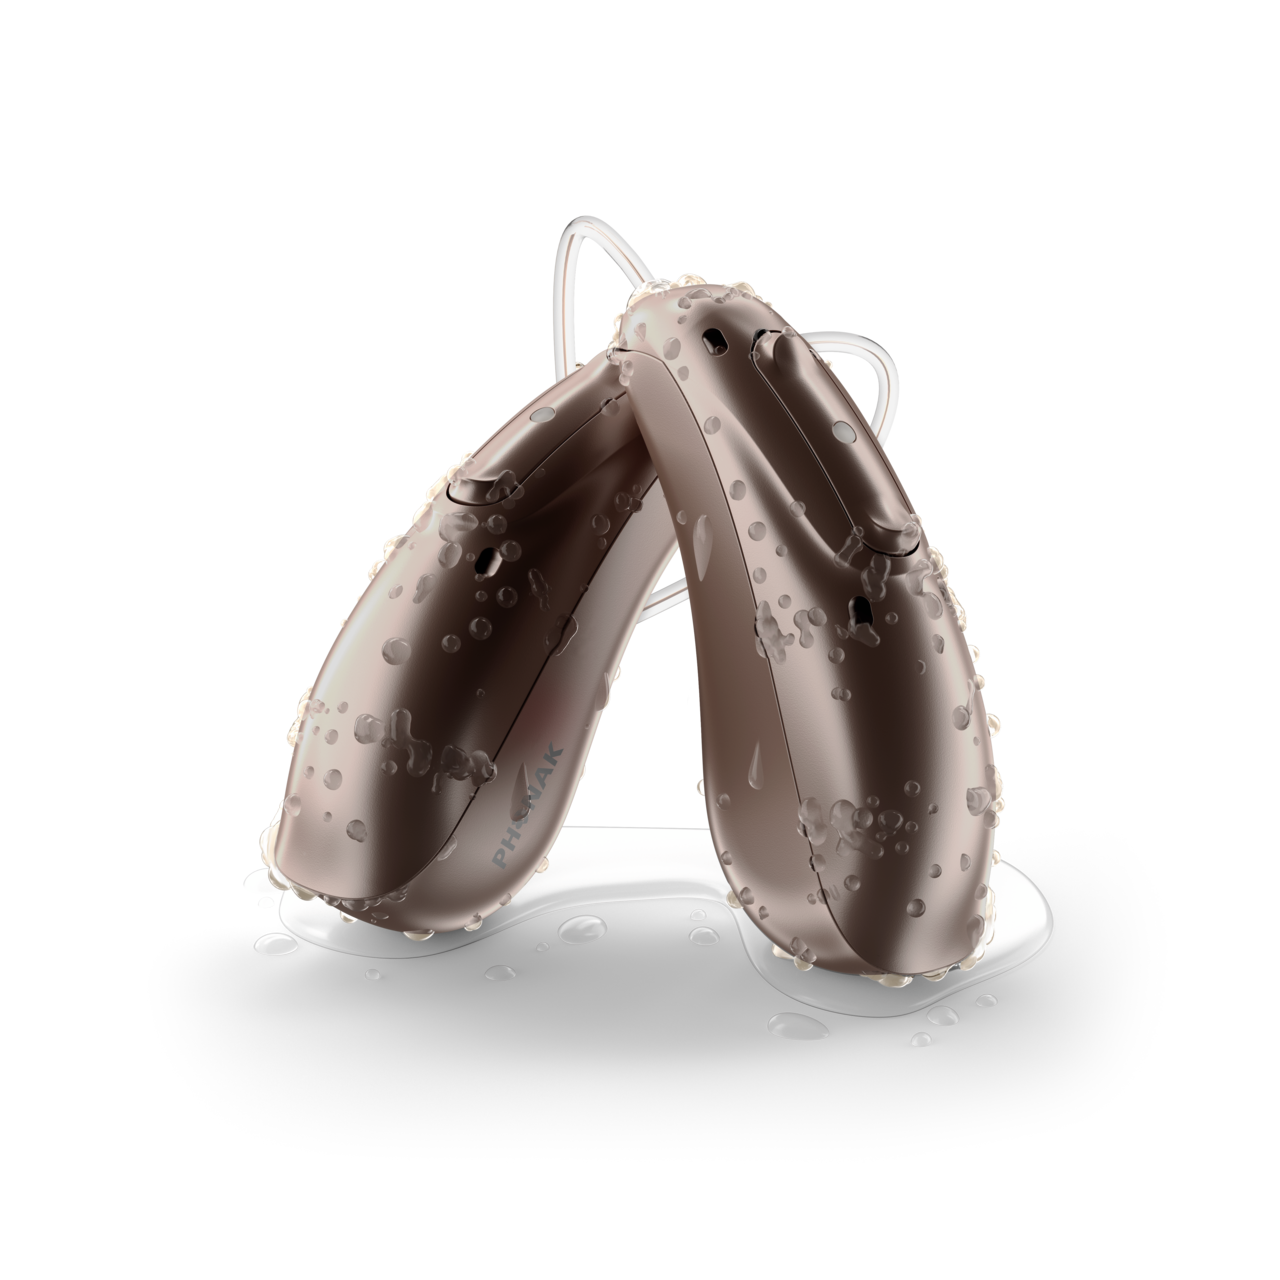 Phonak Audeo Life Lumity hearing aids covered with water droplets.